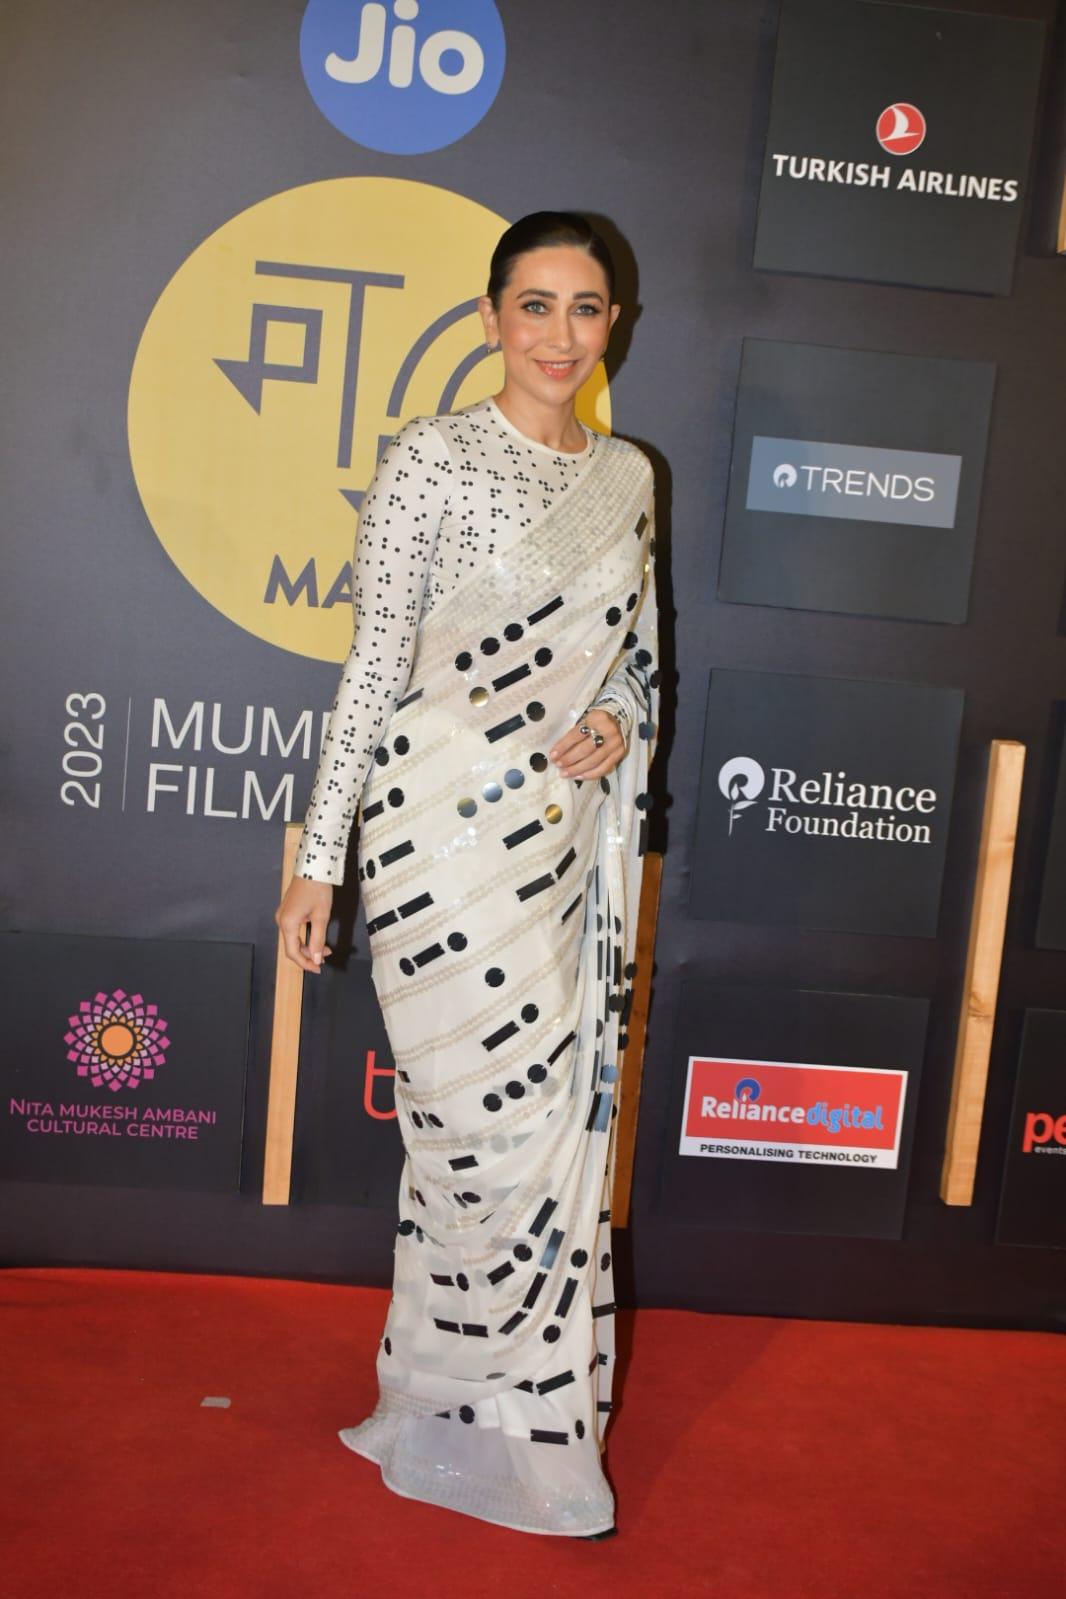 Karisma Kapoor showed up in a beautiful white saree to support the screening of her sister Kareena Kapoor's movie, 'The Buckingham Murders'